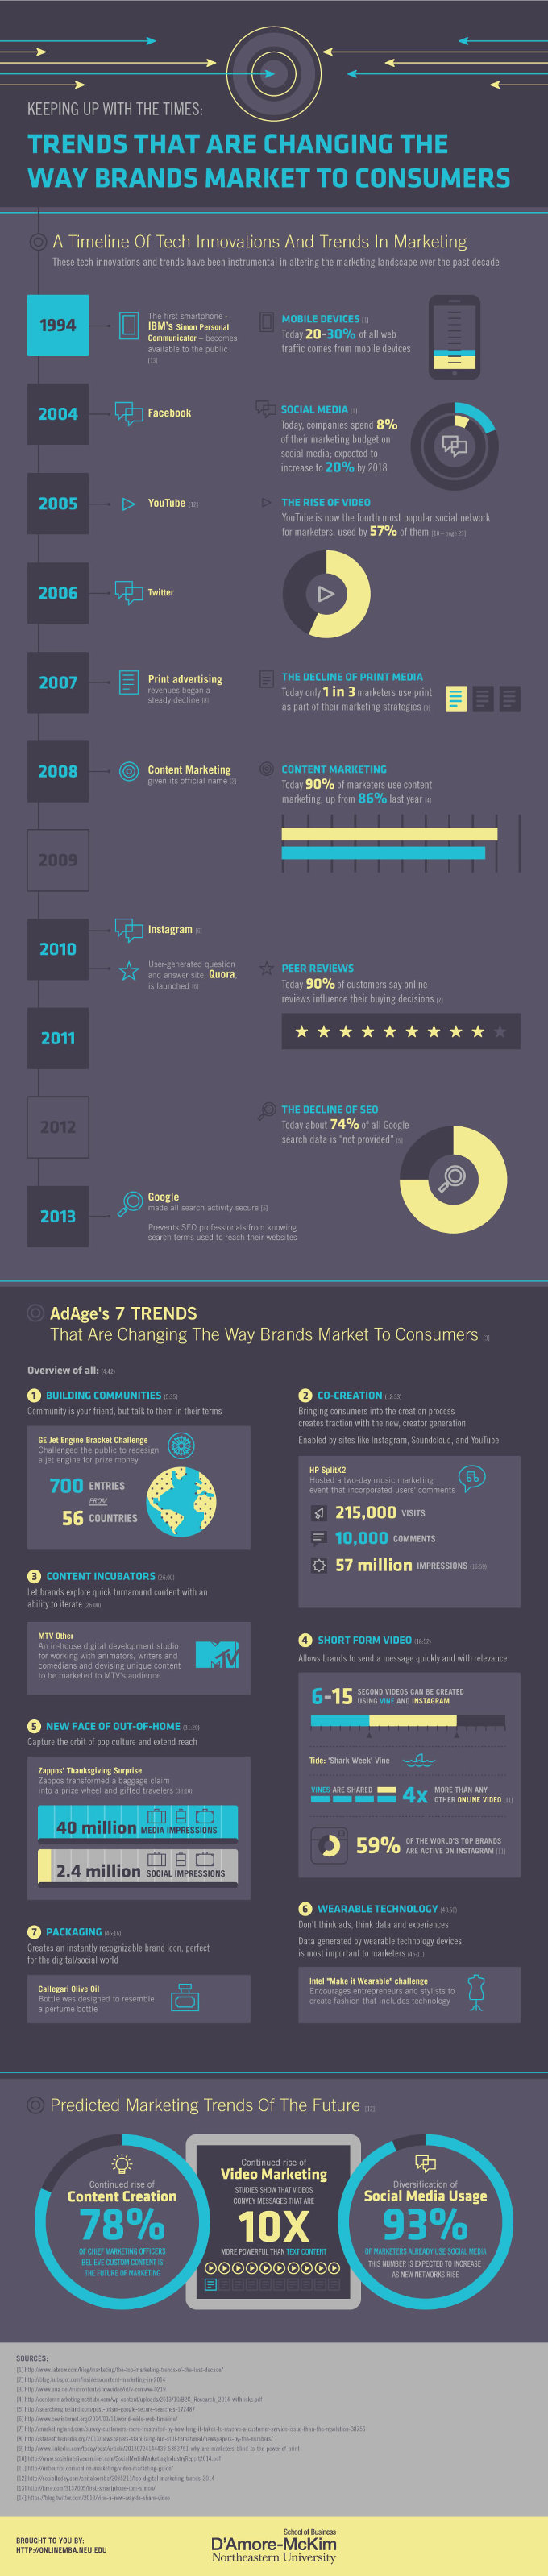 Innovative marketing trends in infographic